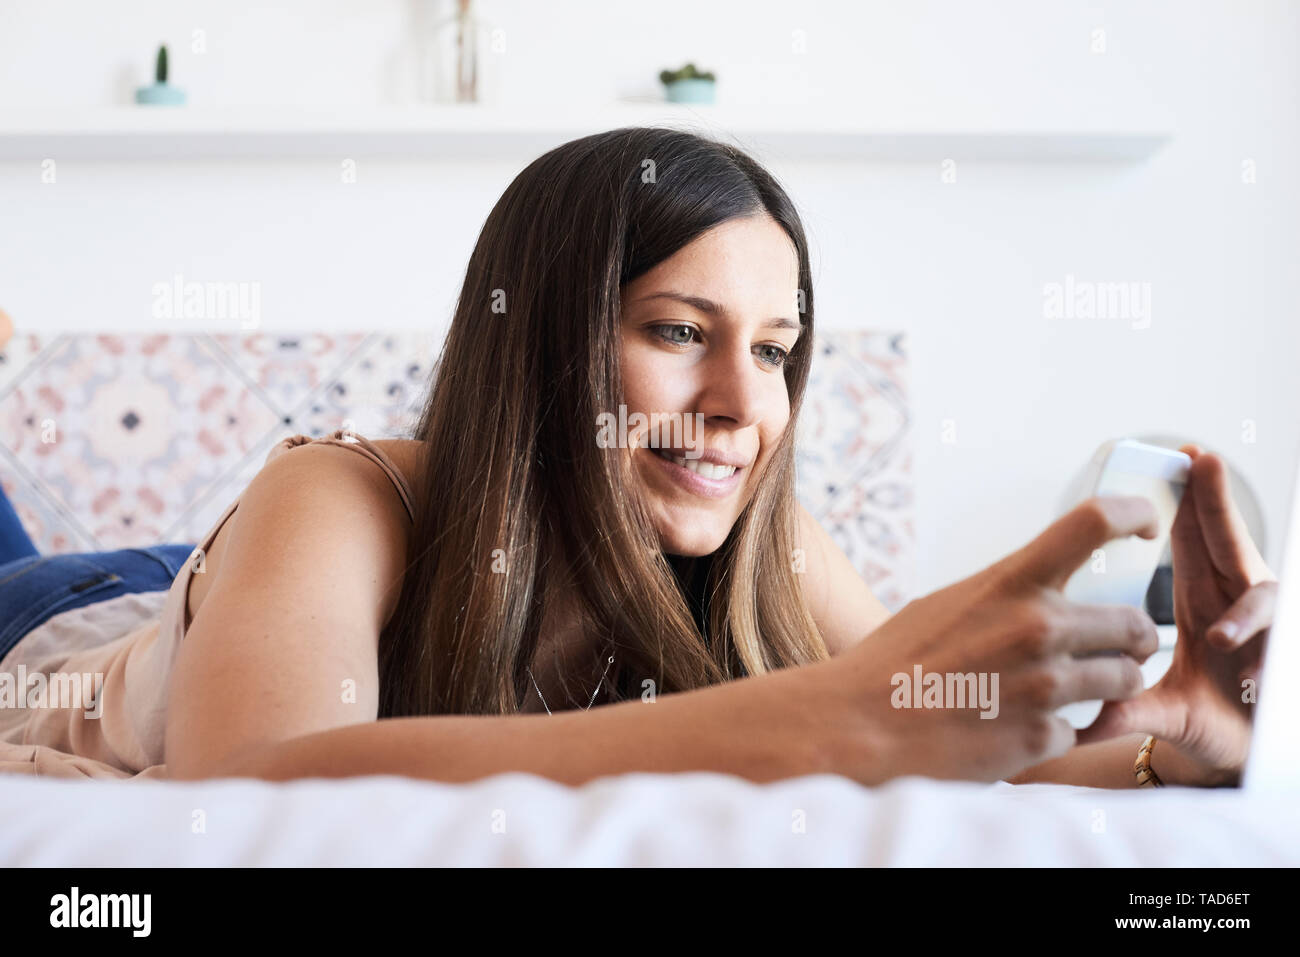 Portrait of smiling young woman using smartphone Banque D'Images